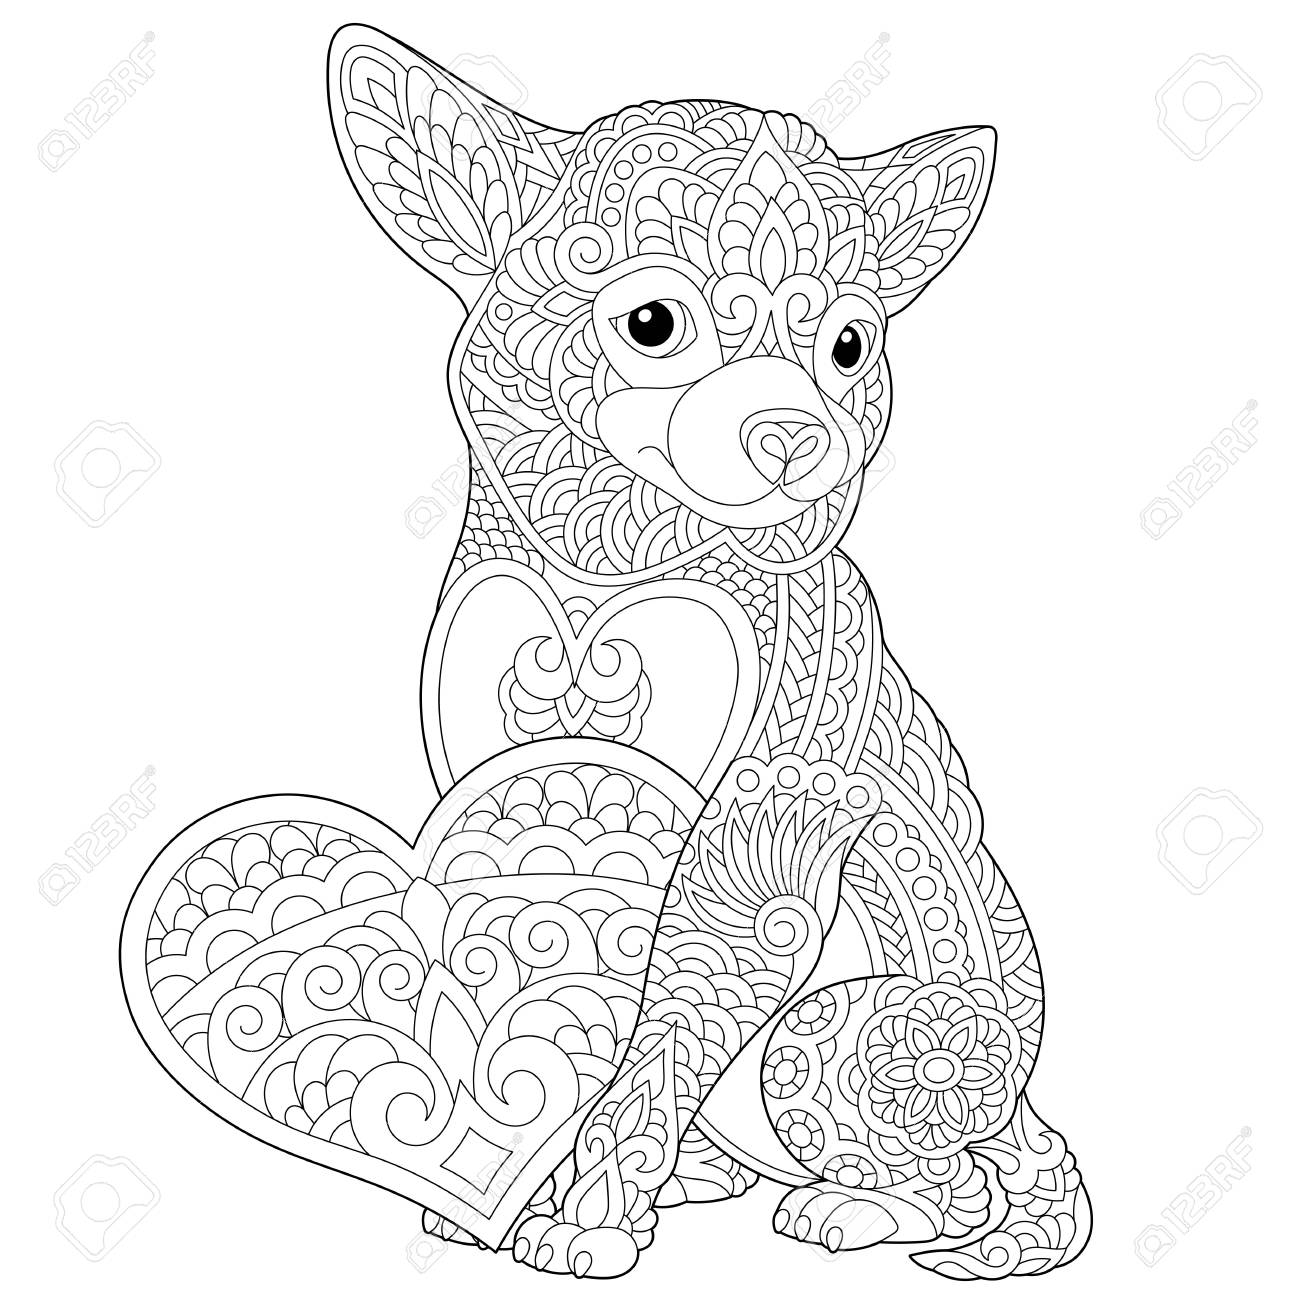 Coloring page lovely dog with heart for valentines day card anti stress colouring picture with chihuahua freehand sketch drawing with doodle elements royalty free svg cliparts vectors and stock illustration image